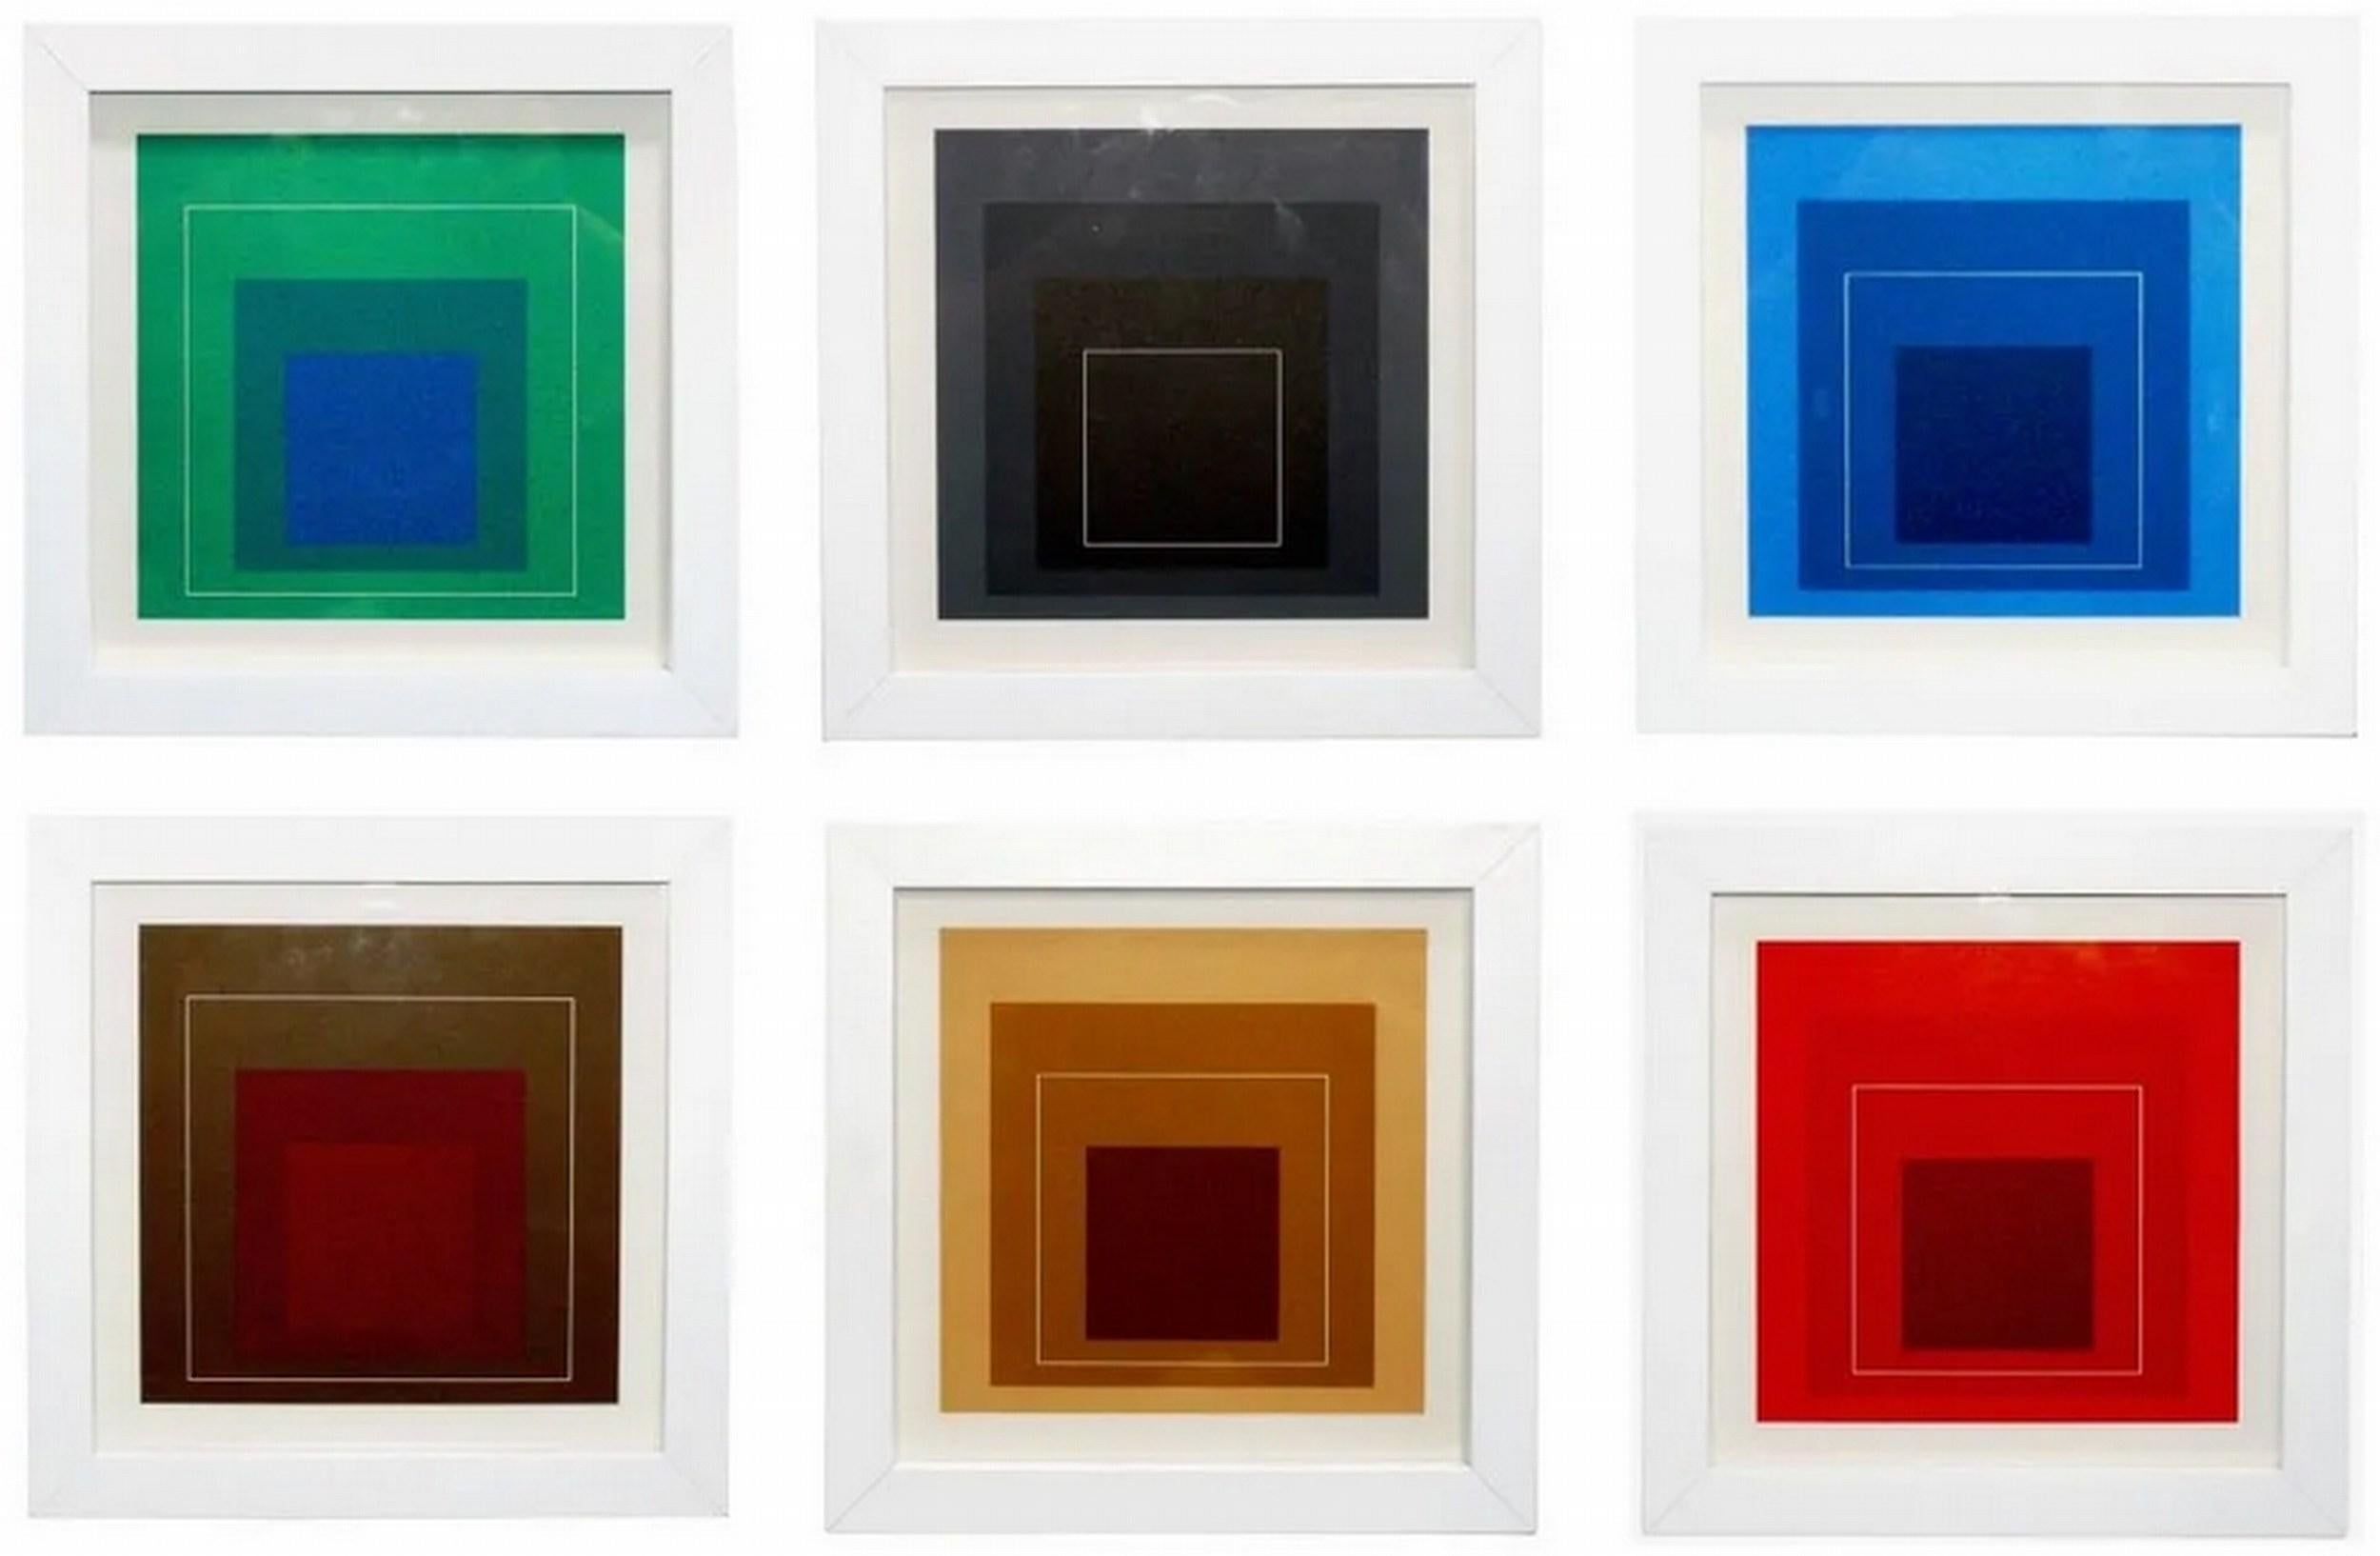 (after) Josef Albers Abstract Print - White Lines Squares - Set of 6 (Minimalism Bauhaus Homage Square - 45% OFF LIST)